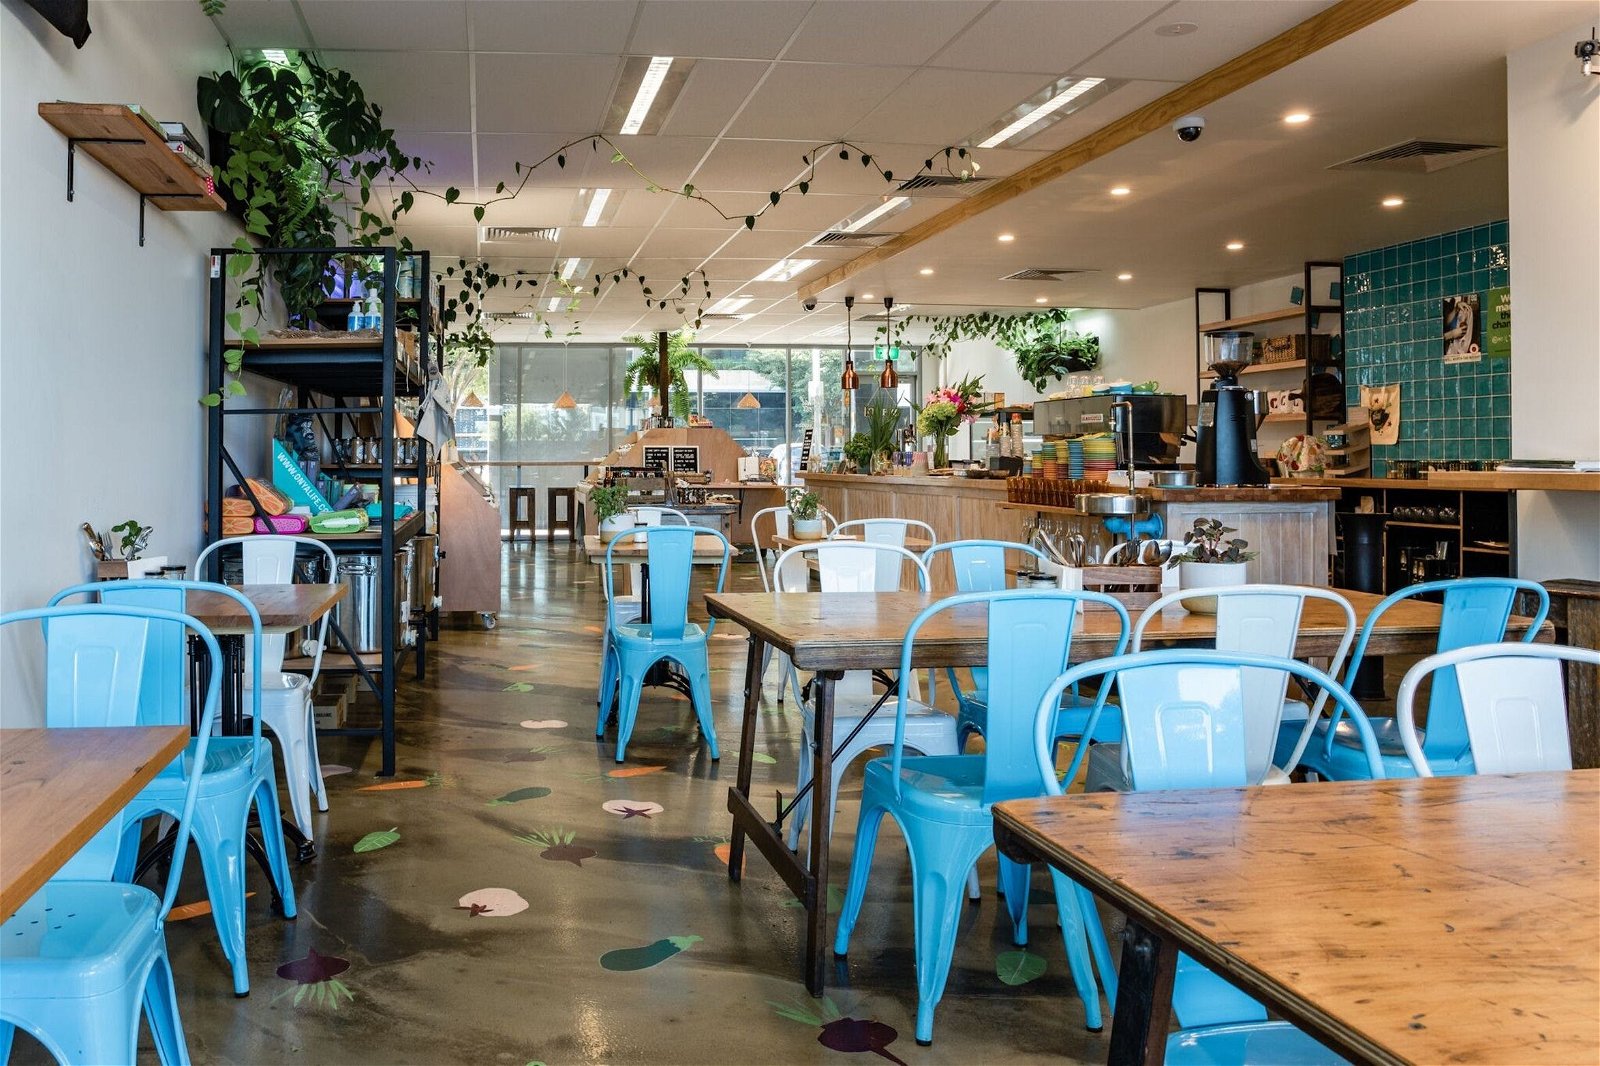 Local Press Wholefoods - Restaurant Canberra